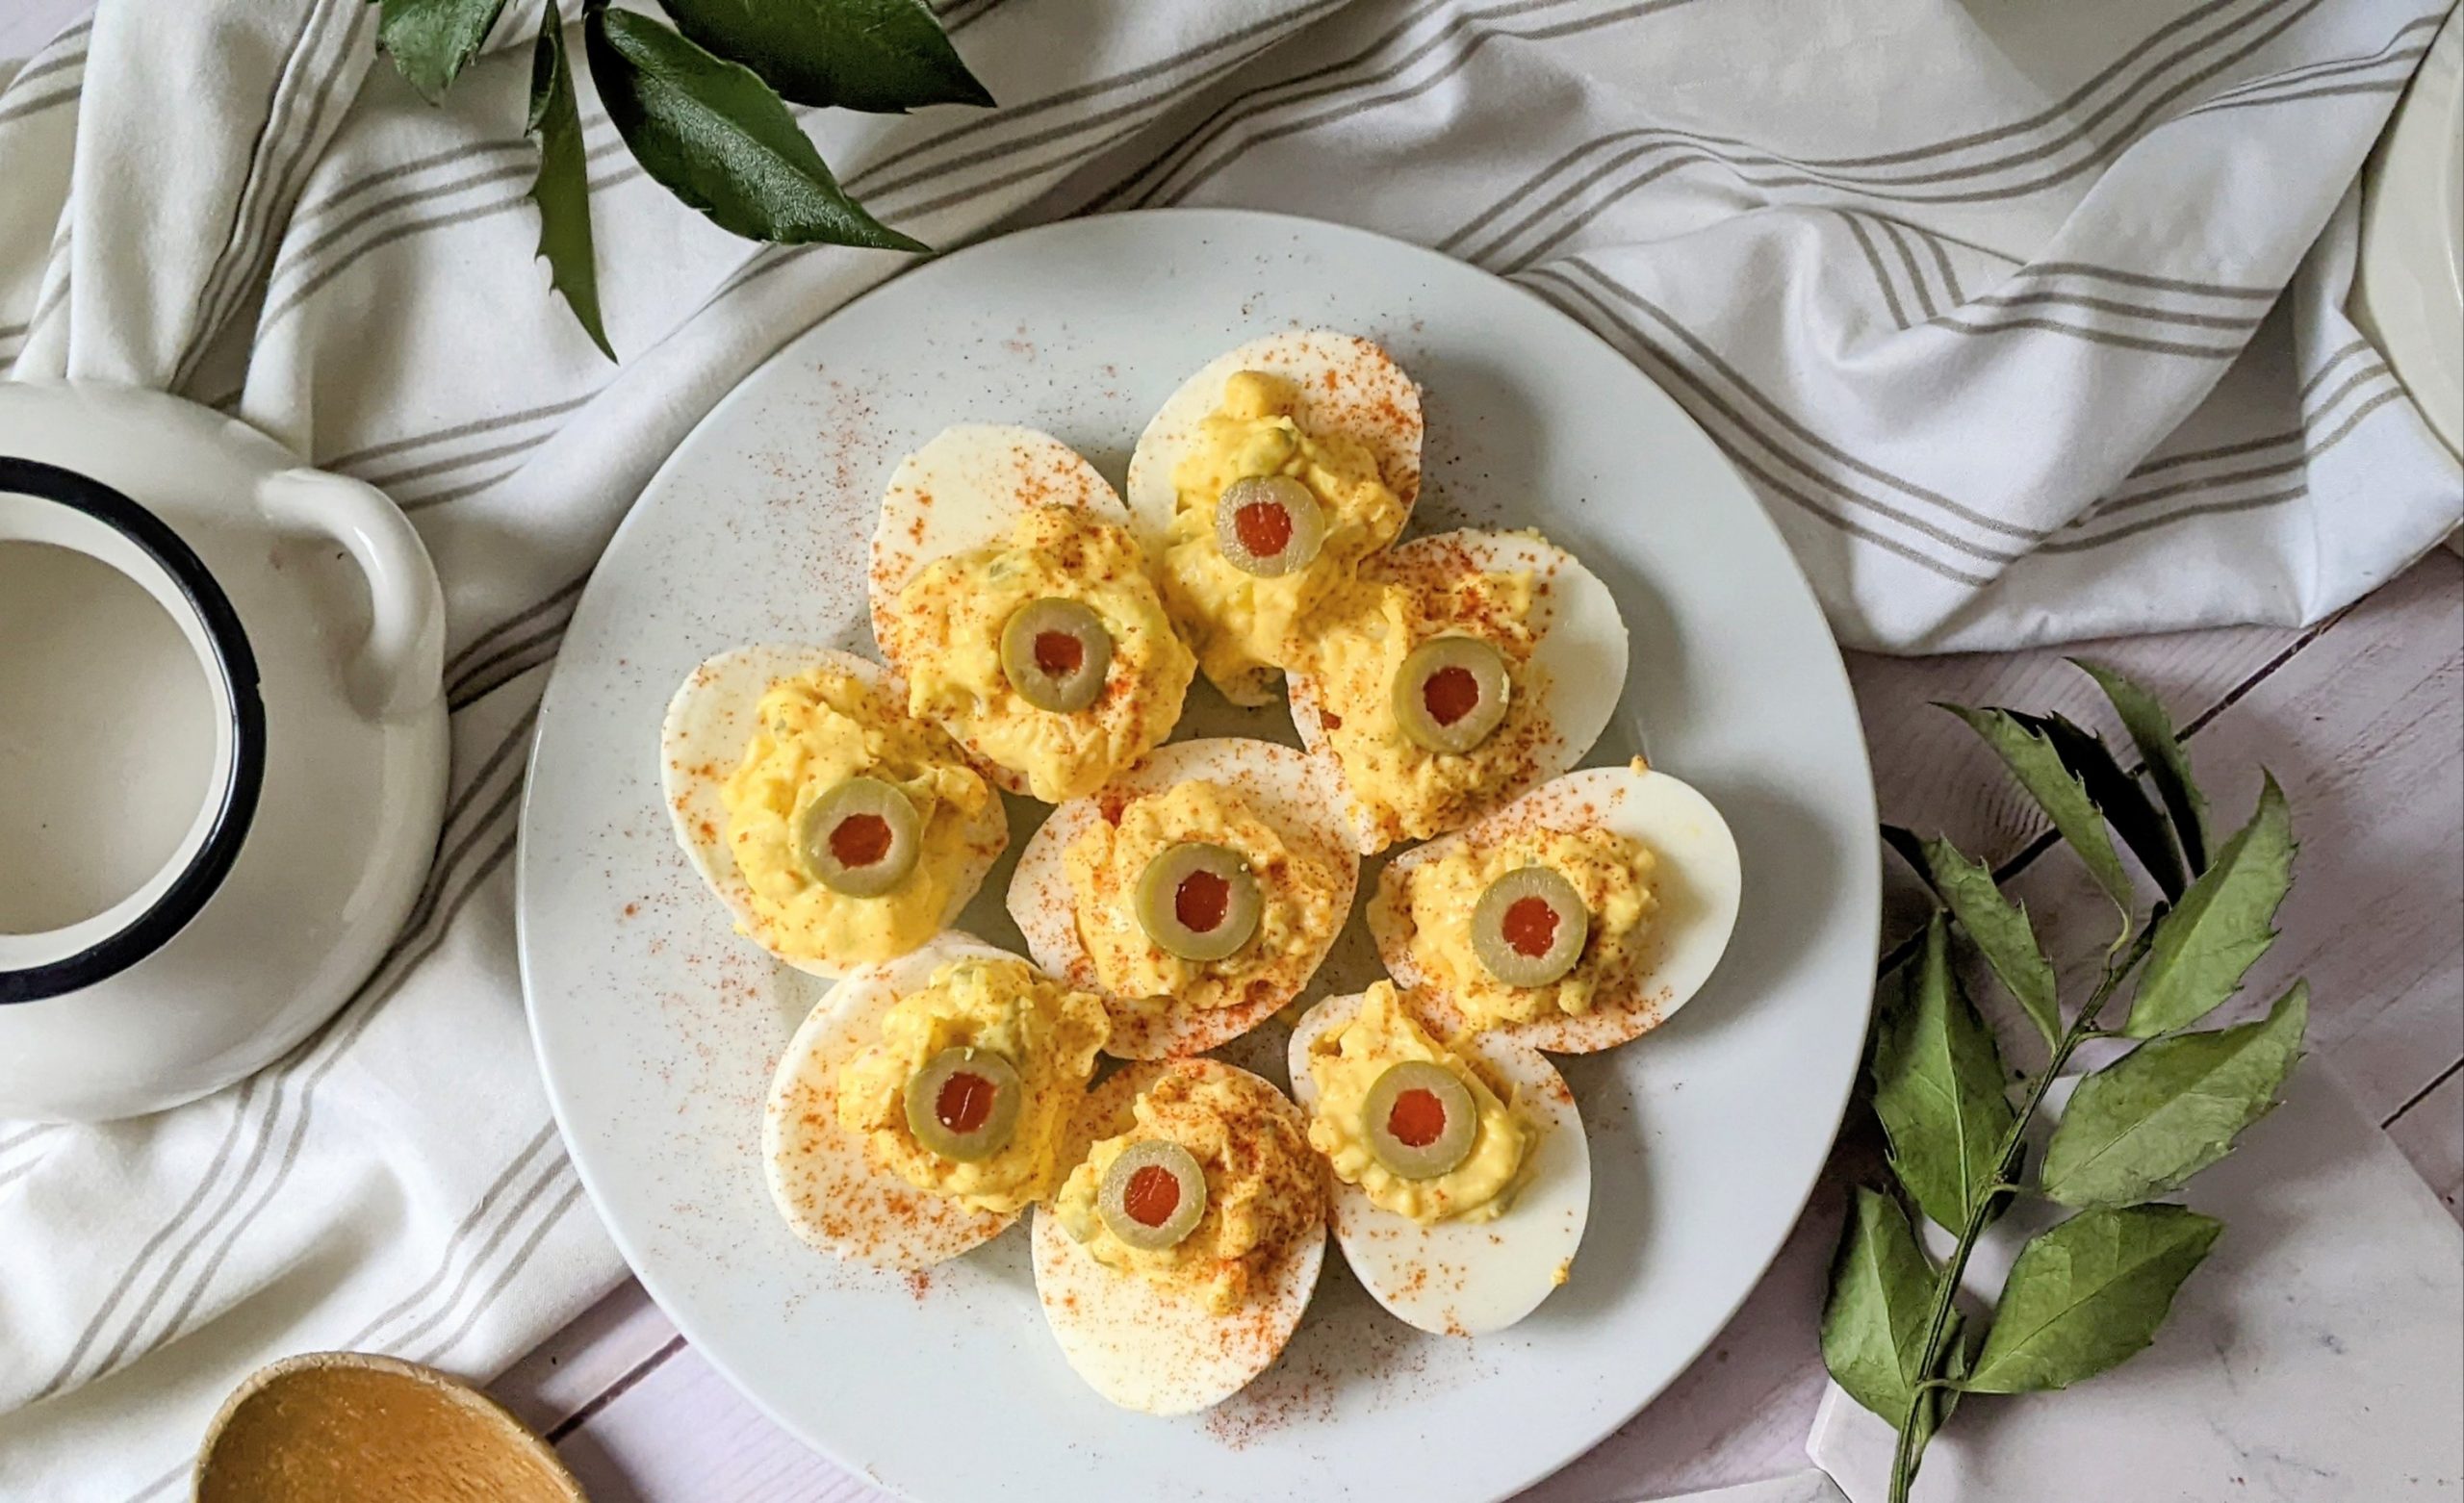 deviled eggs with green olives or greek olives mayonnaise dijon mustard paprika sweet pickle relish and mustard